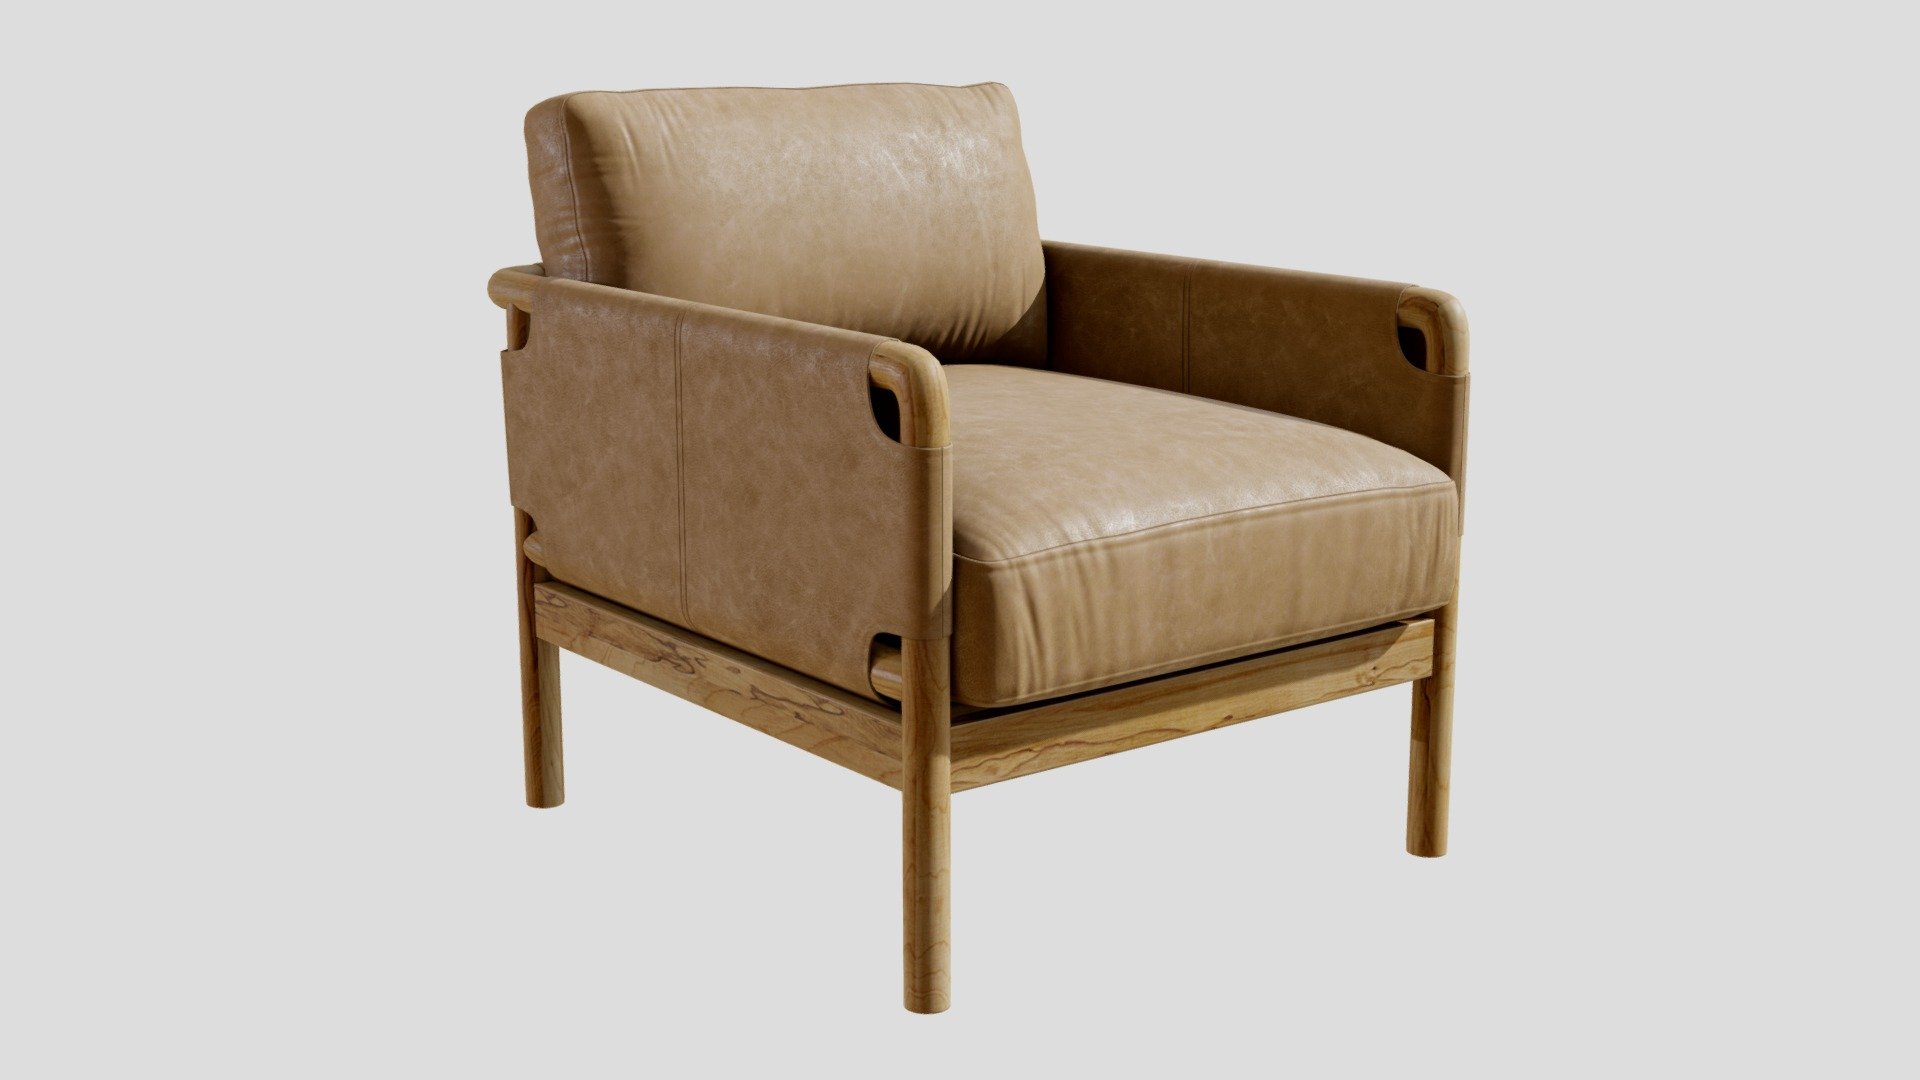 High-quality 3d model of a Crate and Barrel Navarro Ash Wood and Leather Accent Chair

Original: https://www.crateandbarrel.com/navarro-ash-wood-and-leather-accent-chair/s538115

17148 polygons
17444 vertices - Crate&Barrel Navarro Armchair - Buy Royalty Free 3D model by 3detto 3d model